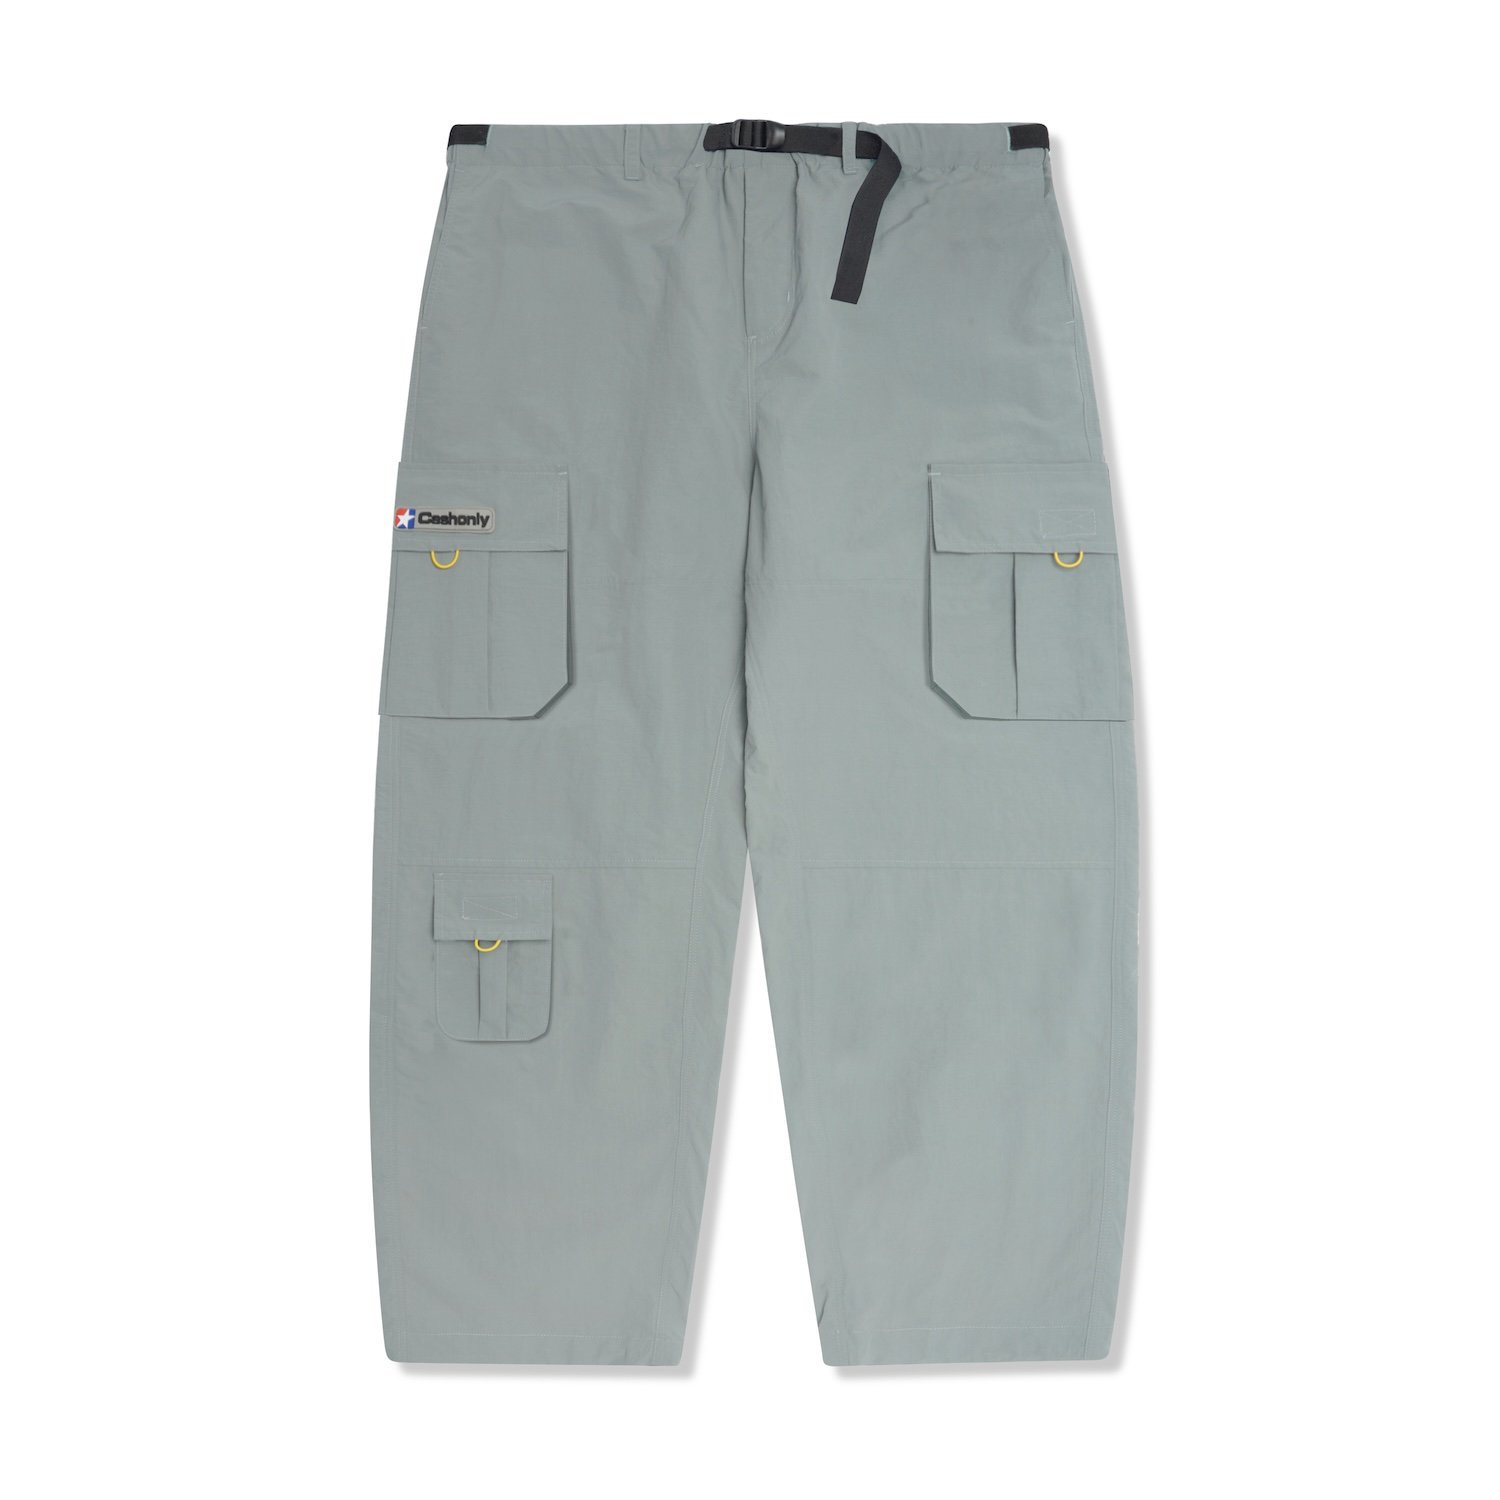 Cash Only<br>Trax Cargo Pants<br>